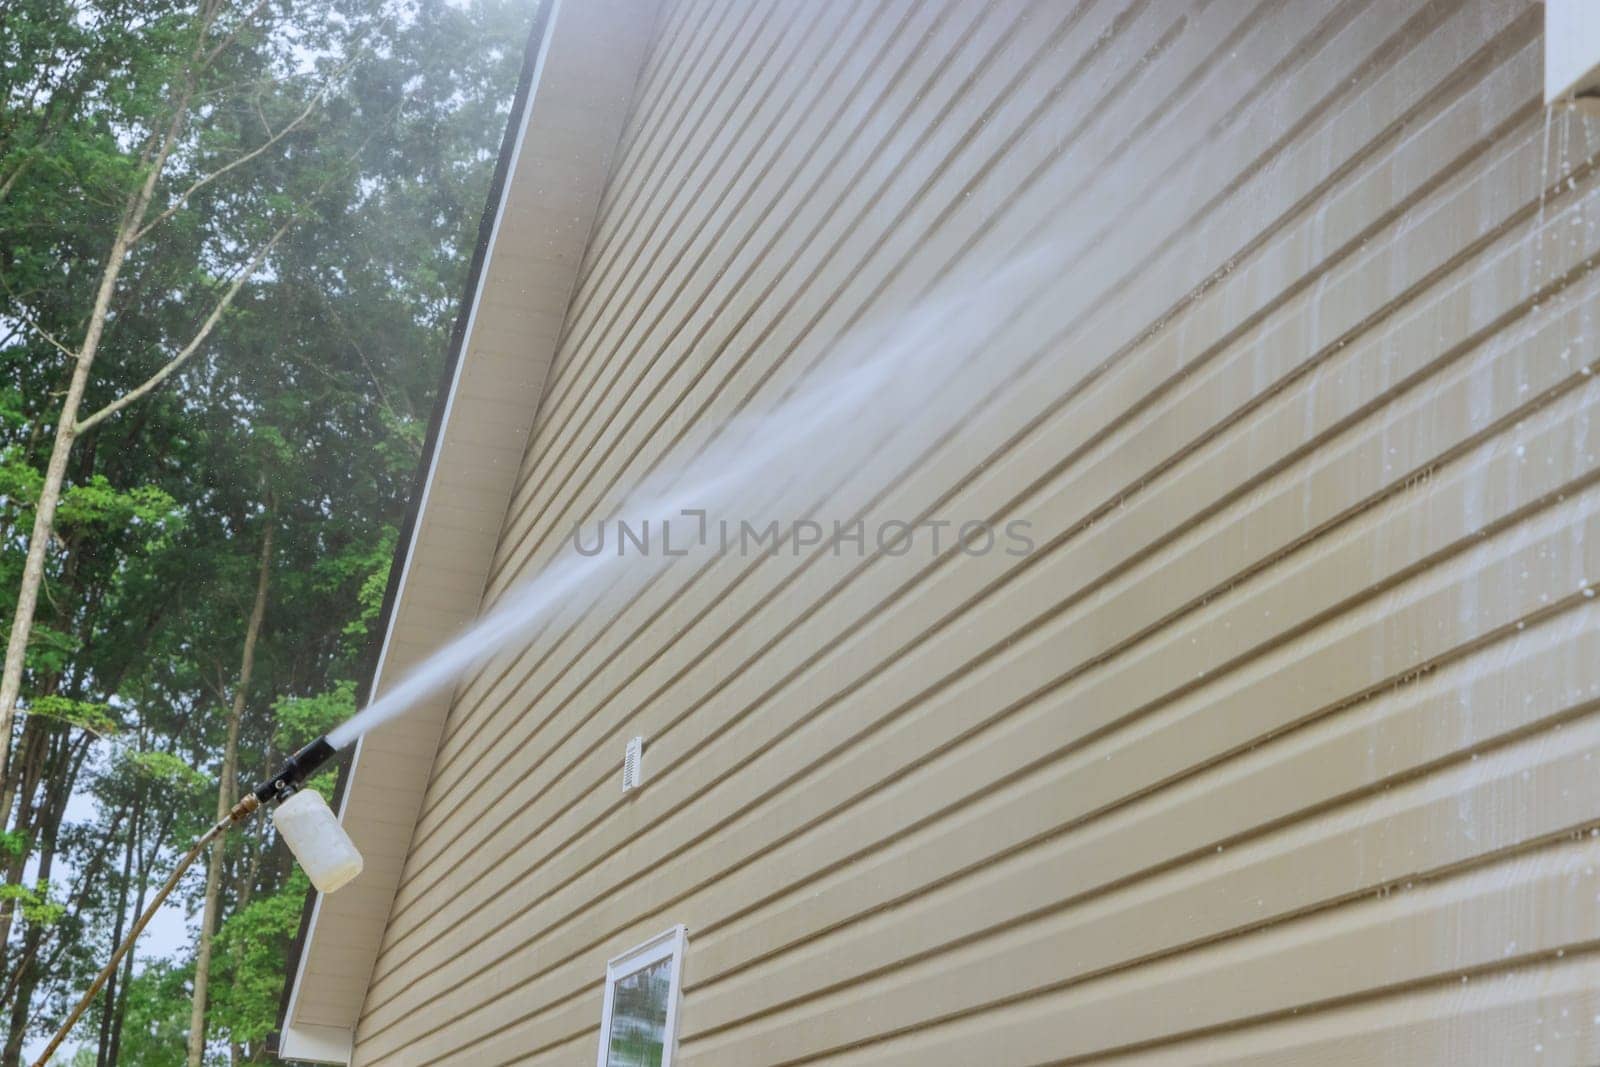 Service man in washing siding houses by using a high pressure nozzles spray water soap cleaner by ungvar